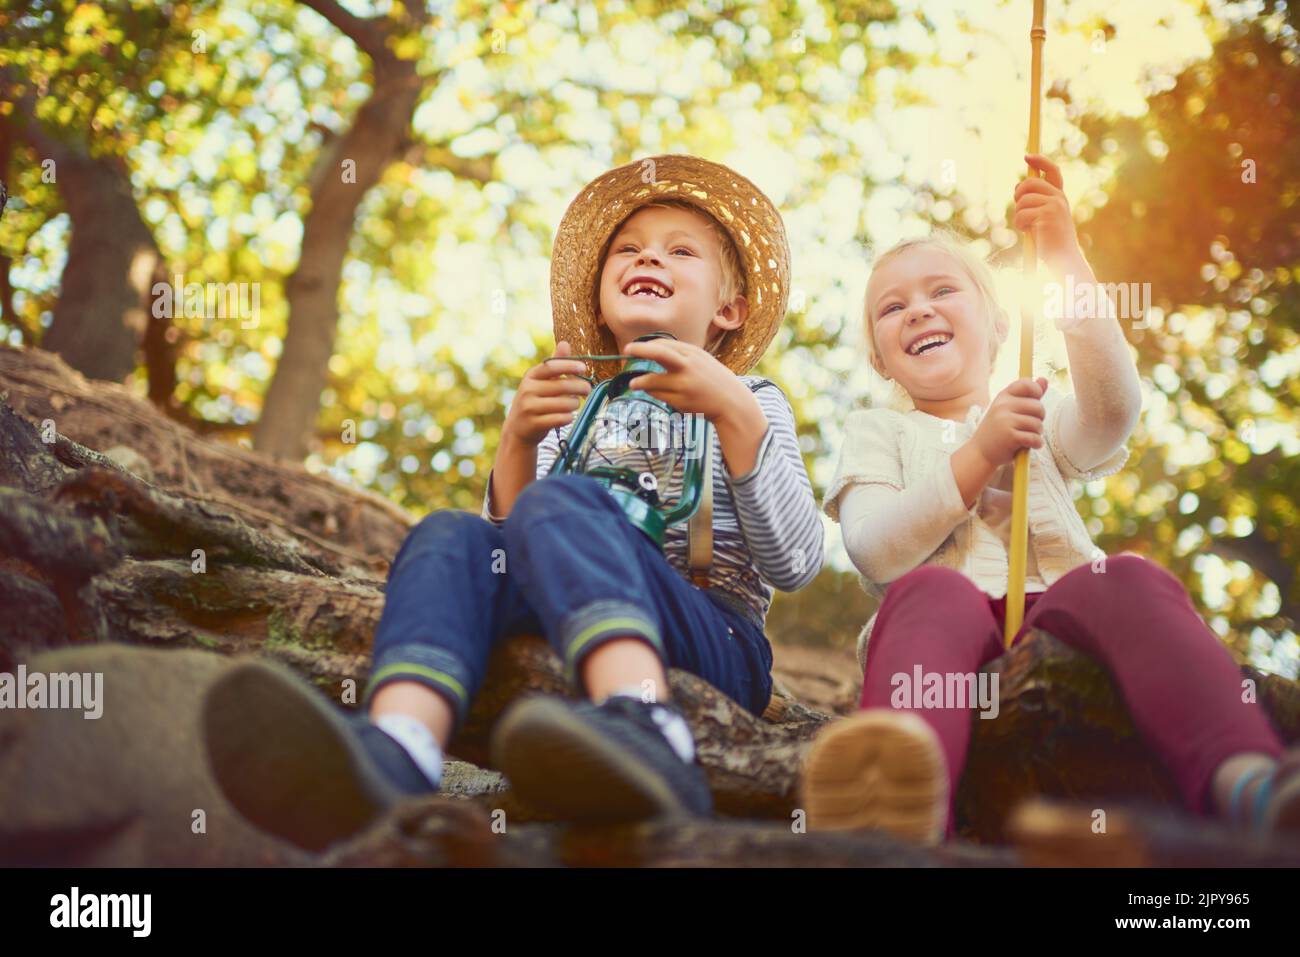 Outdoor play is important to a childs development. two little children playing together outdoors. Stock Photo